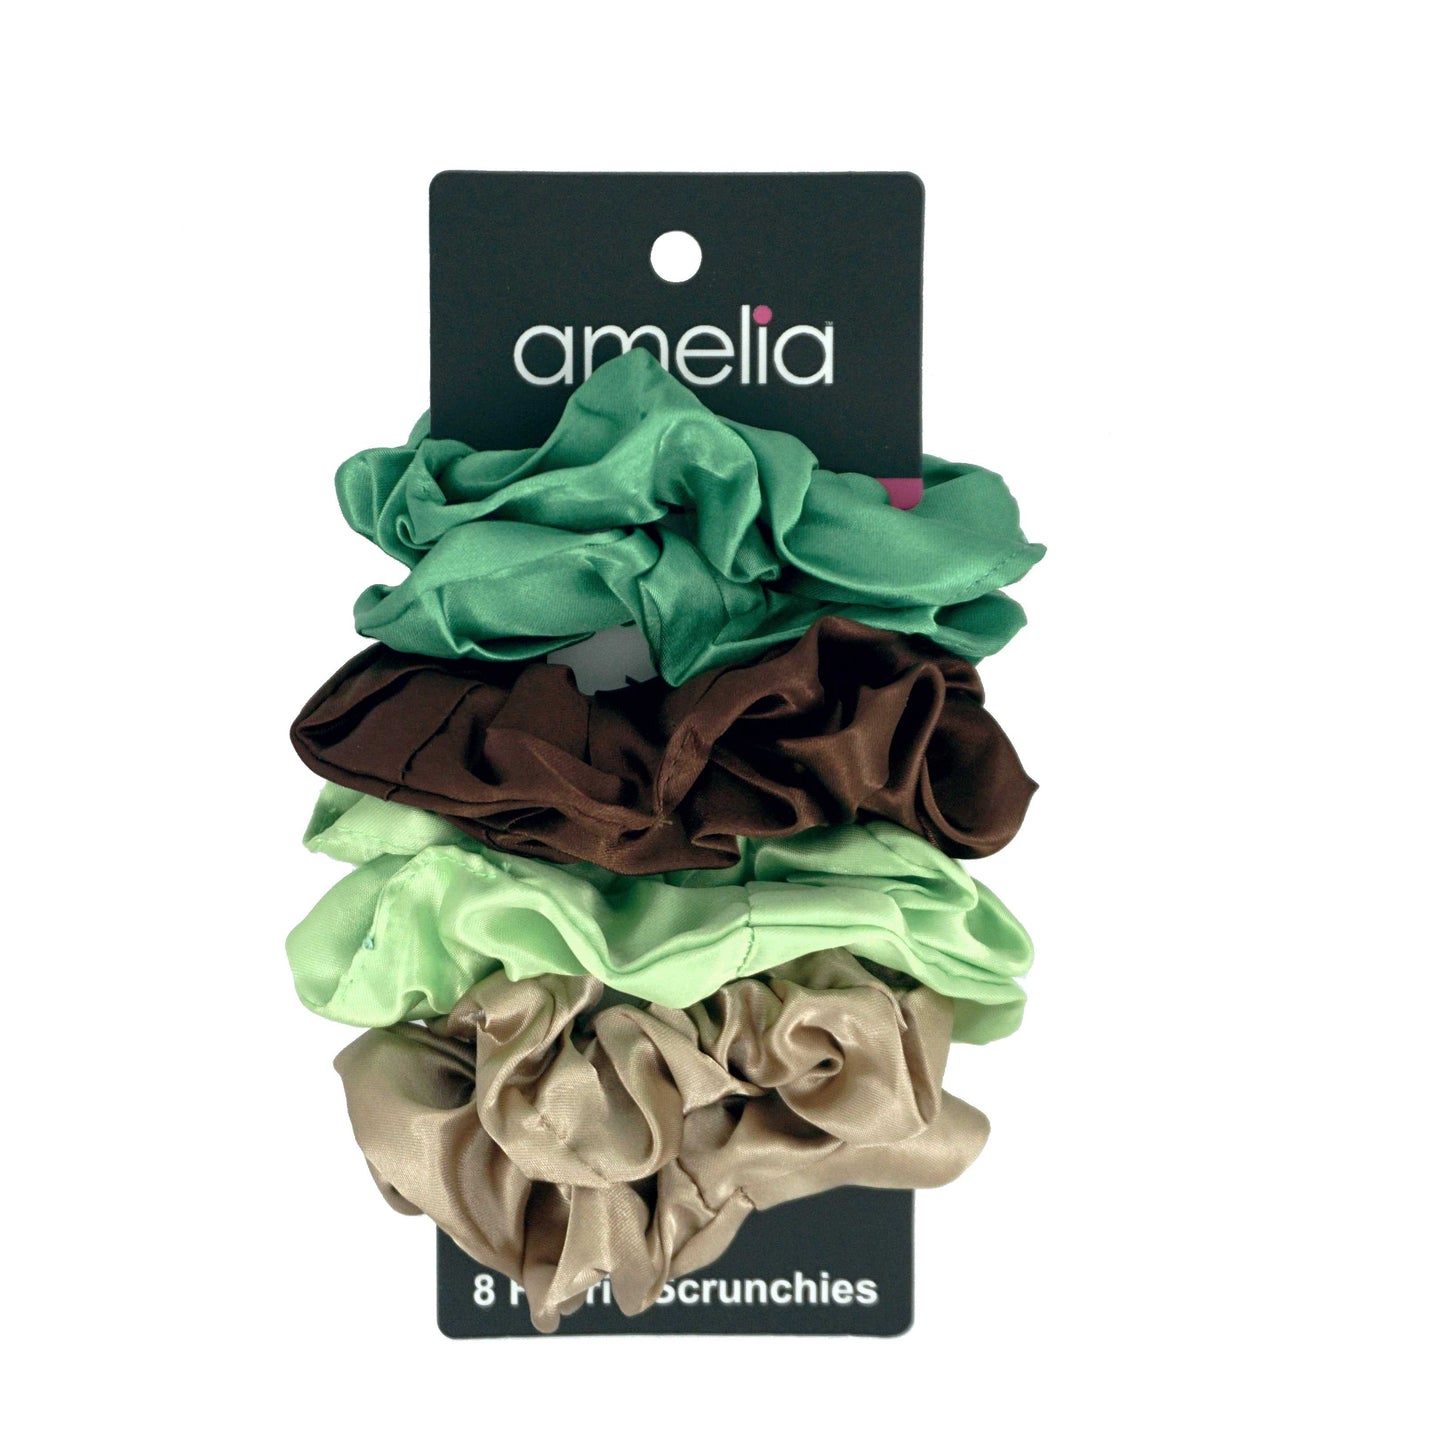 Amelia Beauty Products, Green, Brown, Lime and Tan Satin Scrunchies, 3.5in Diameter, Gentle on Hair, Strong Hold, No Snag, No Dents or Creases. 8 Pack